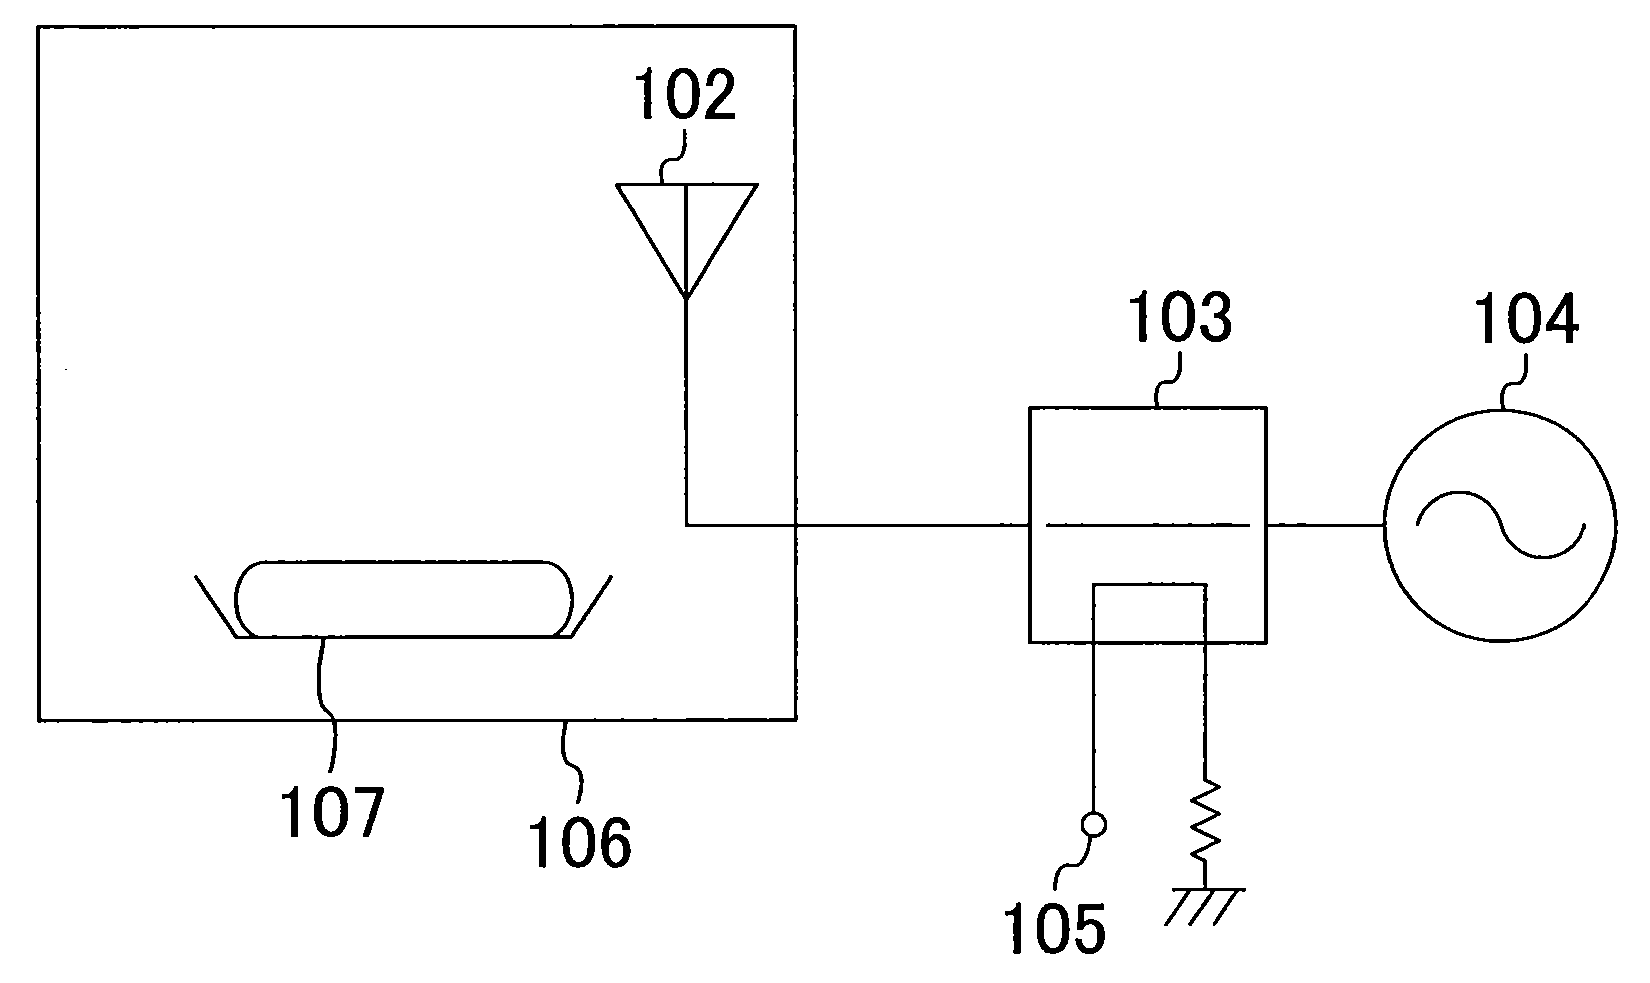 Method for controlling high-frequency radiator